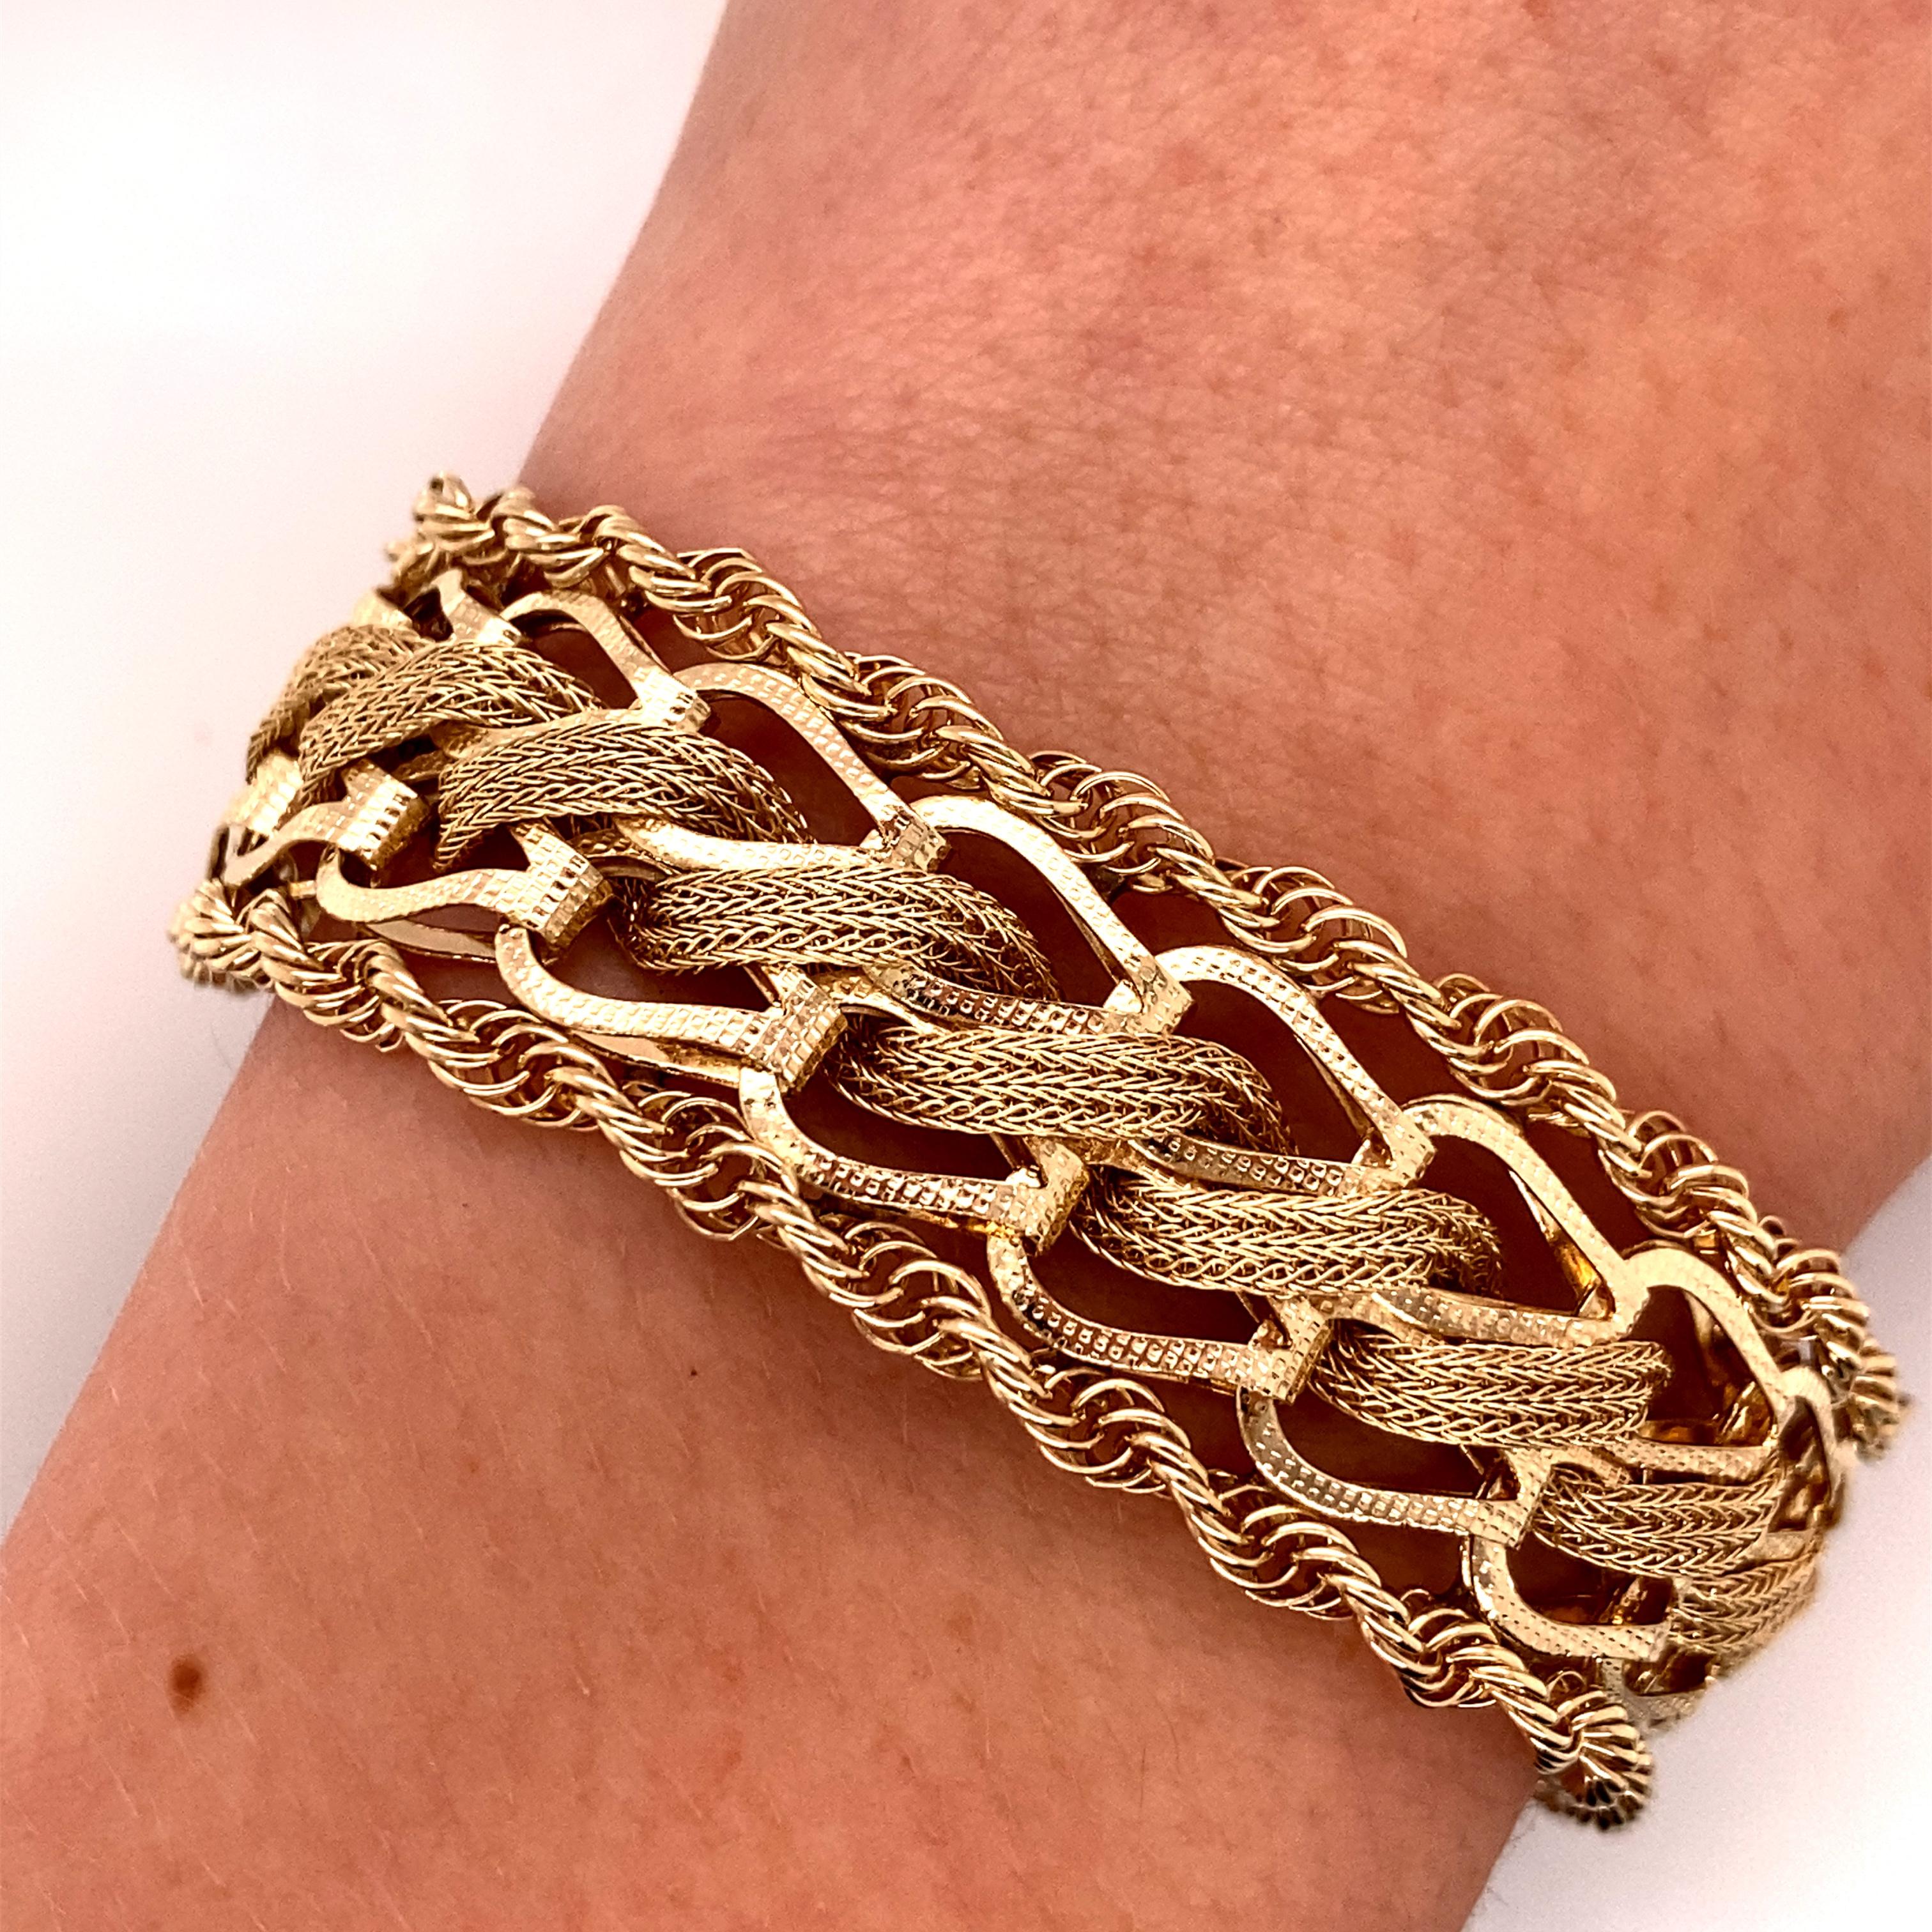 Vintage 1960s 14KY Gold Woven Wheat Link with Rope Edge Wide Charm Bracelet - The bracelet measure 7 inches long and 3/4 inch wide and features a hidden clasp with a figure 8 safety. The bracelet weighs 26.4 grams.